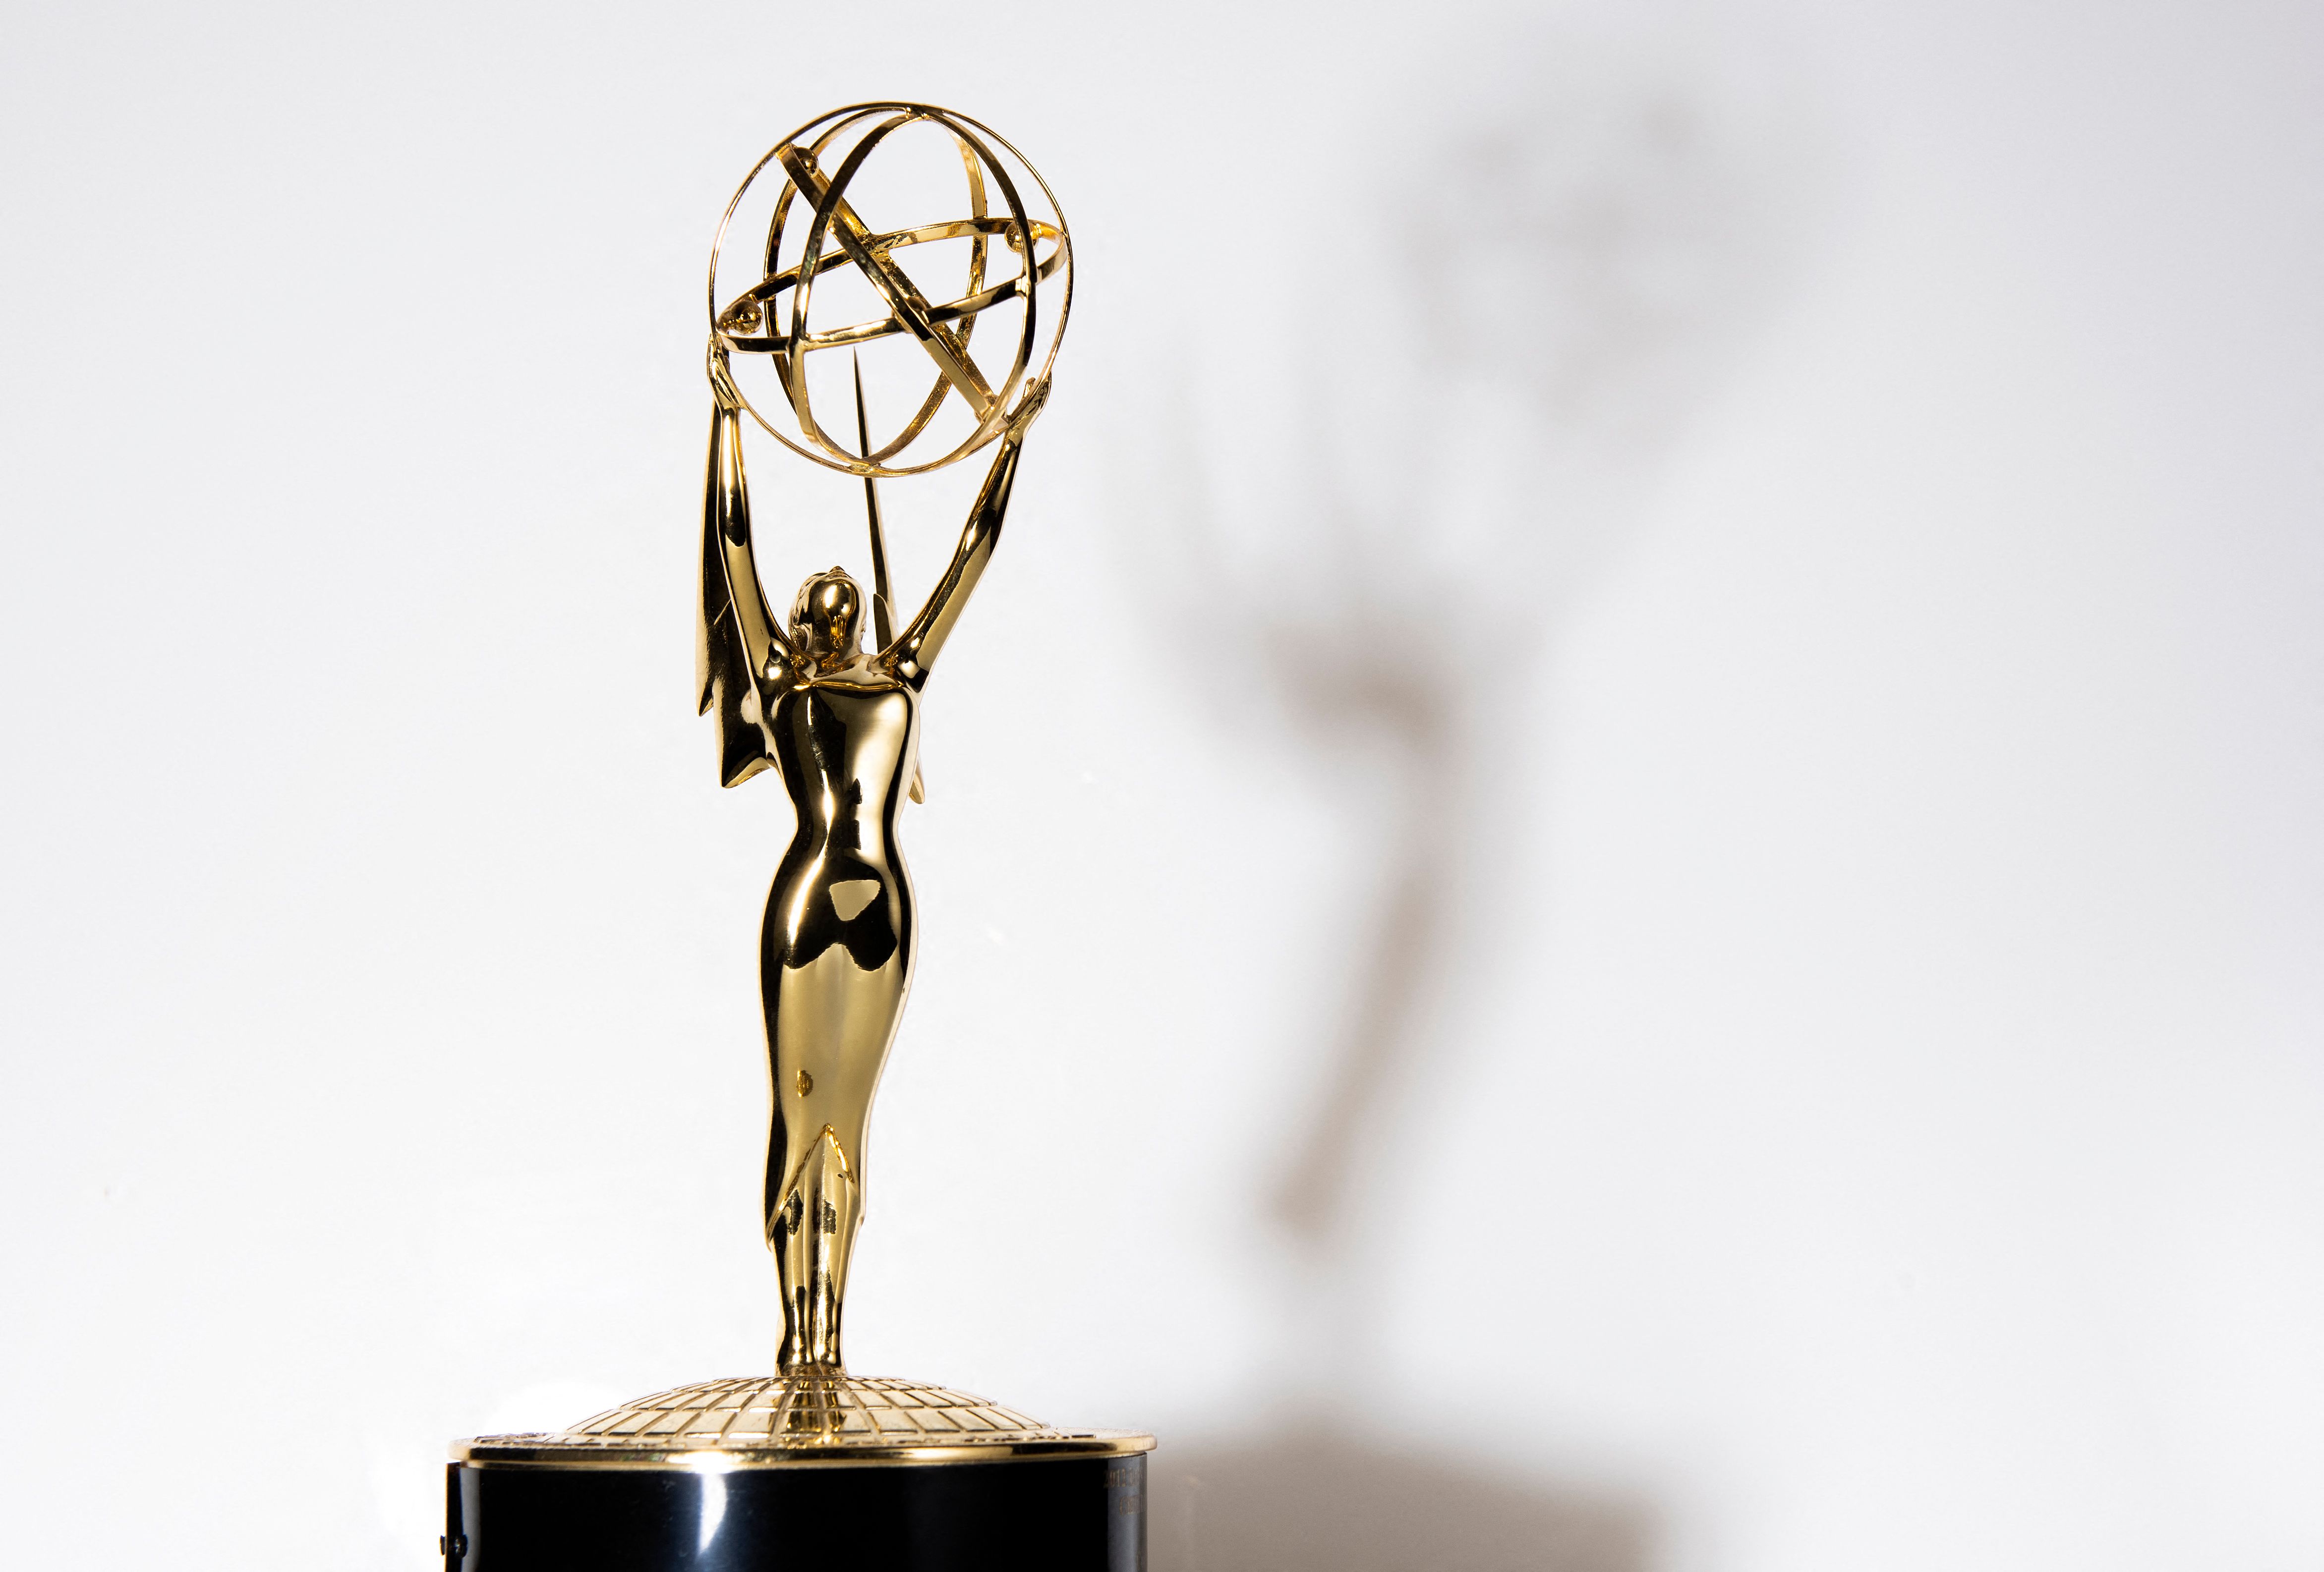 2021 EMMY® AWARDS NOMINATIONS ANNOUNCEMENT 